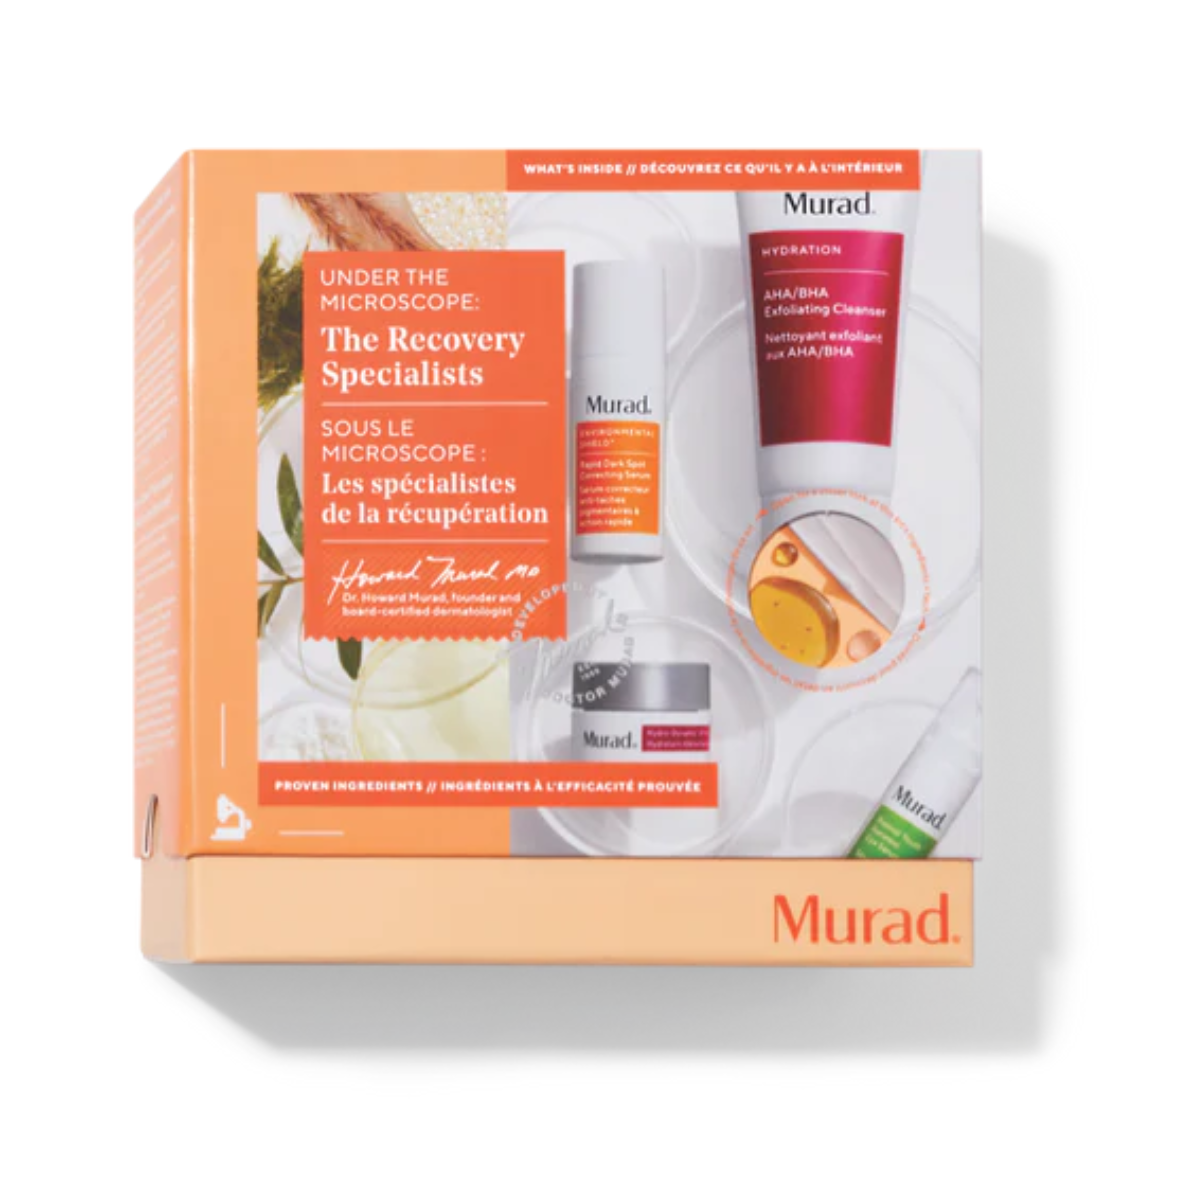 Murad Under the Microscope: The Recovery Specialists Gift Set